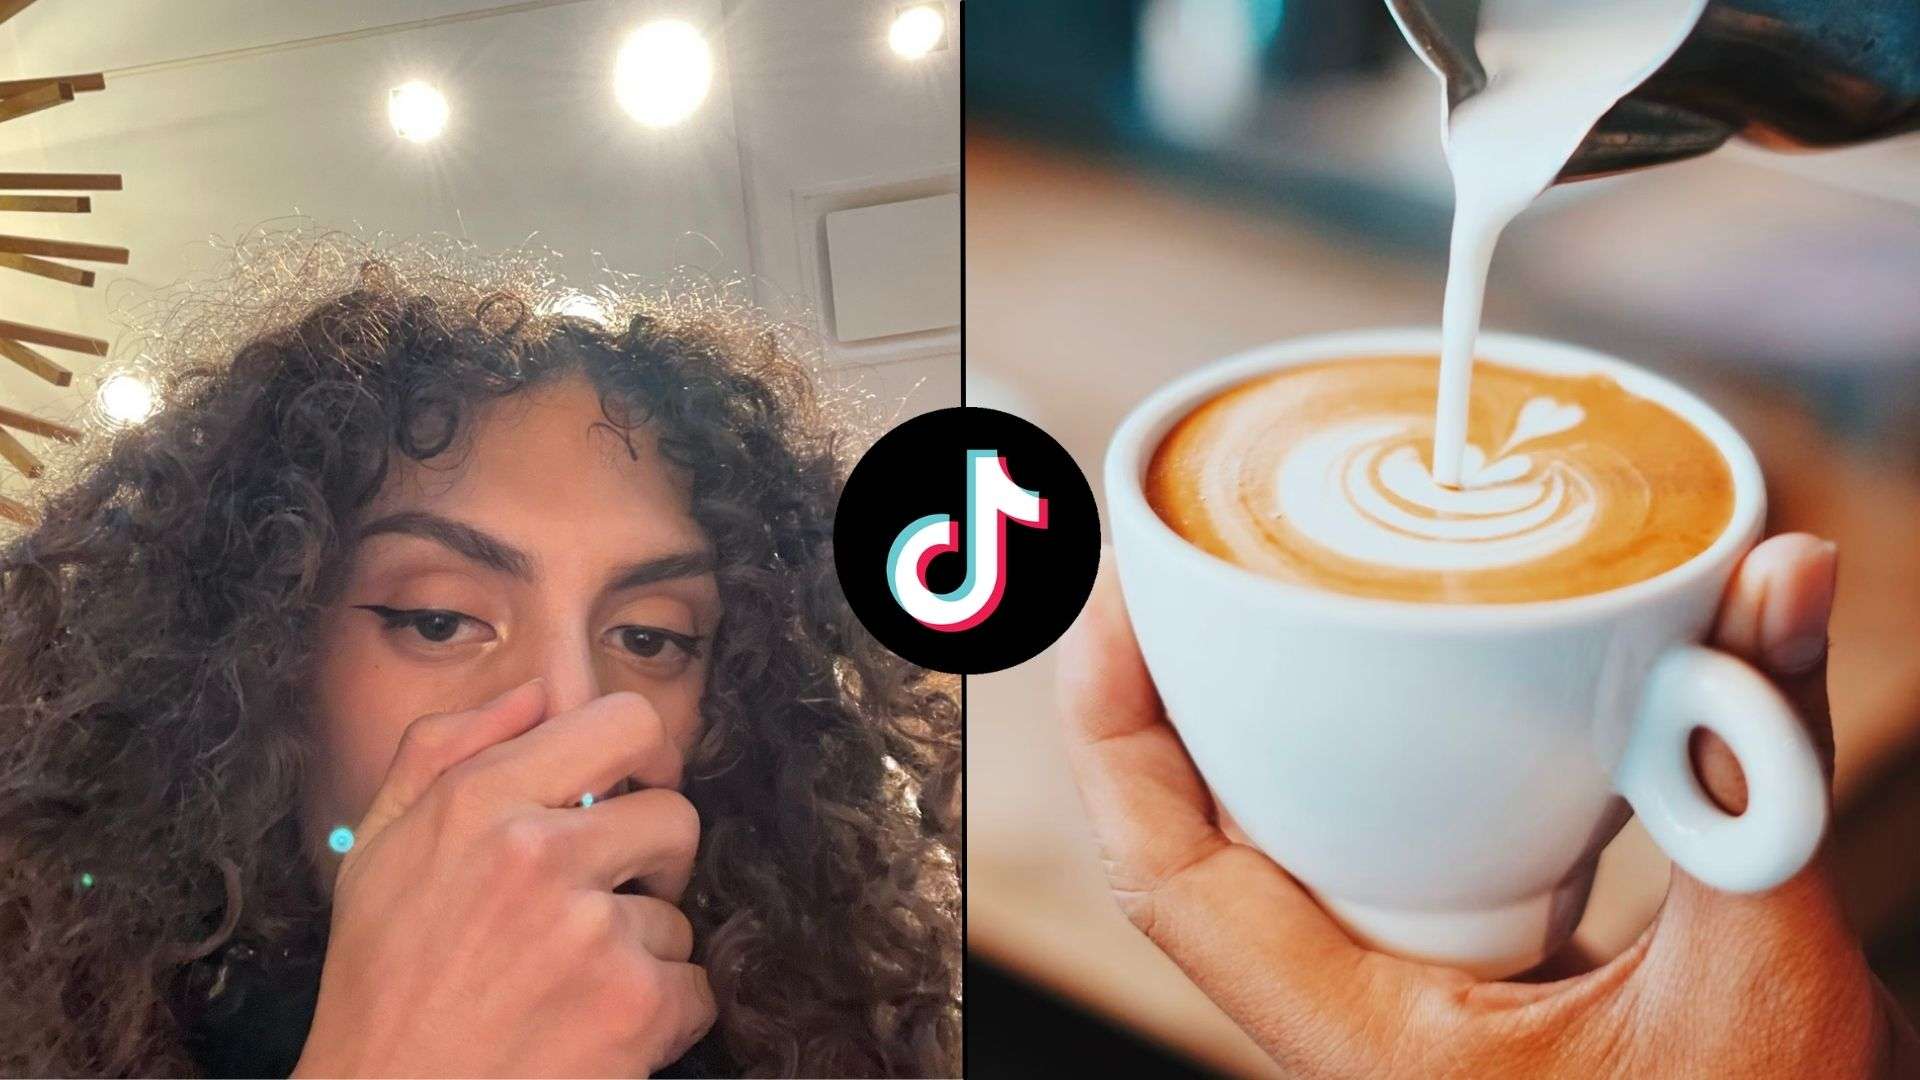 TikToker holding her face next to coffee being poured into cup